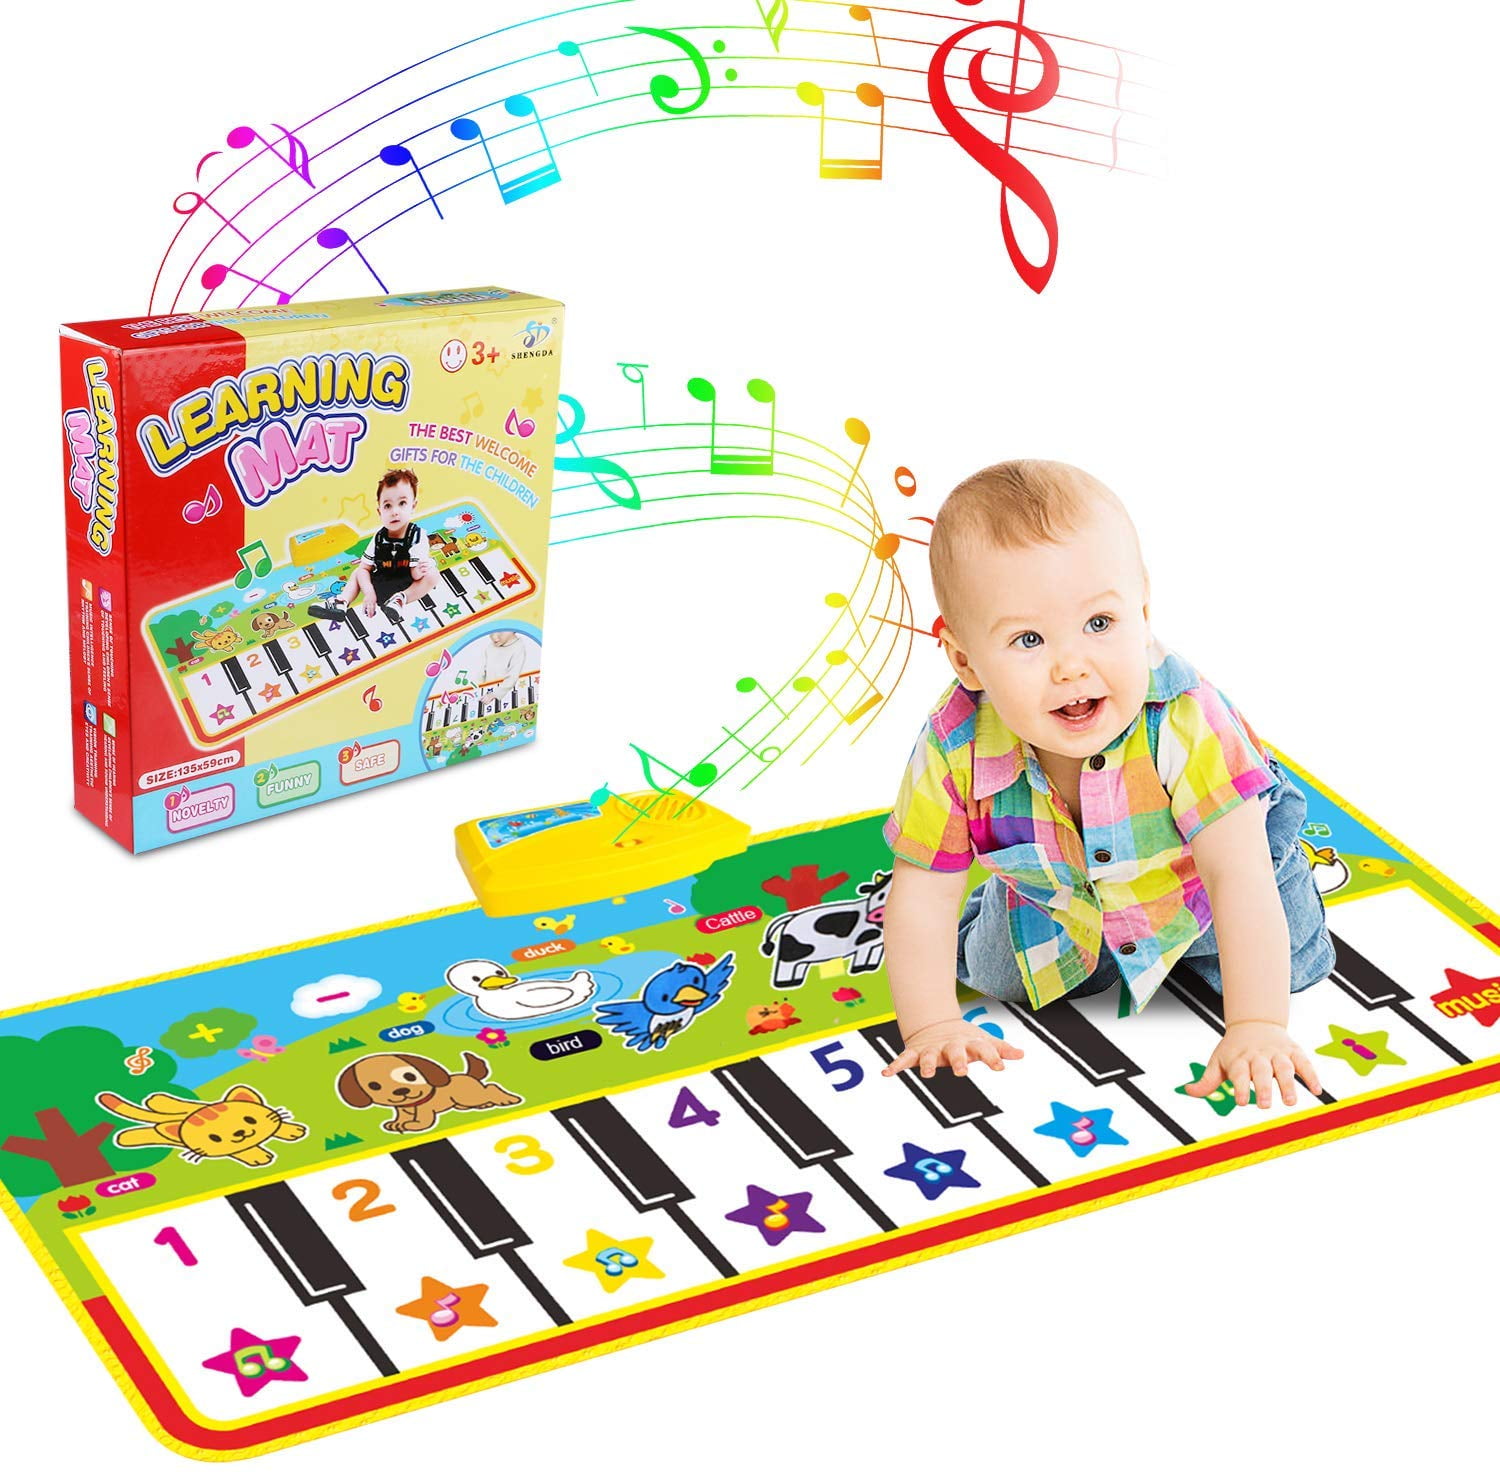 JOYIN Baby Cute Animal Piano Keyboard Music Activity Center Infant Activity Education Toys with Music Lights and Animal Sounds